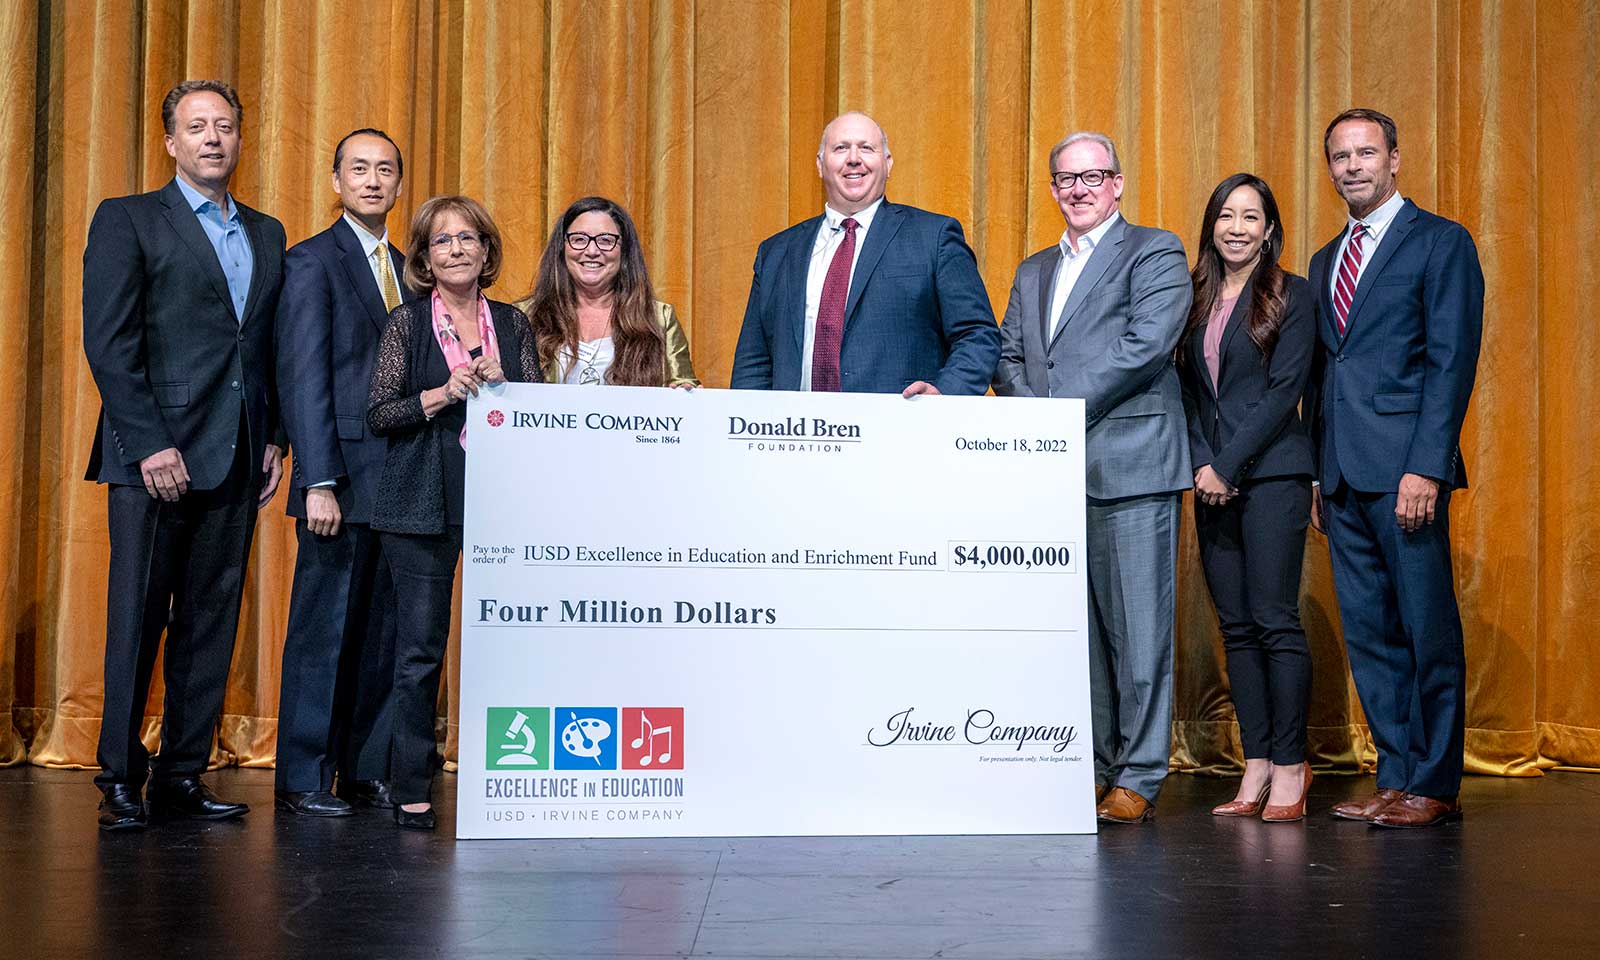 IUSD celebrates 50th anniversary with $4 million gift from Irvine Company and Donald Bren Foundation